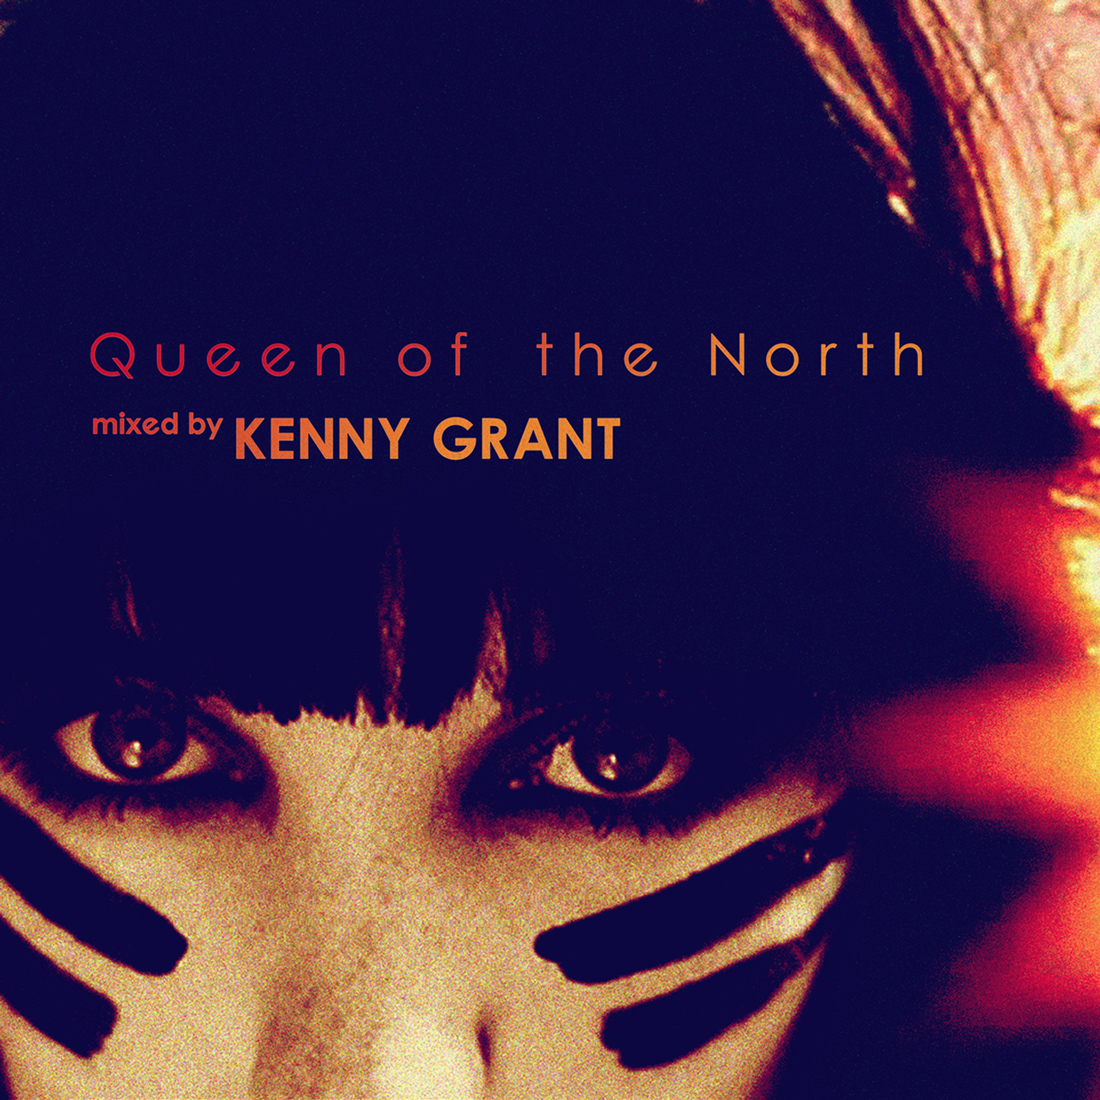 queen of the north font cover kenny grant house music